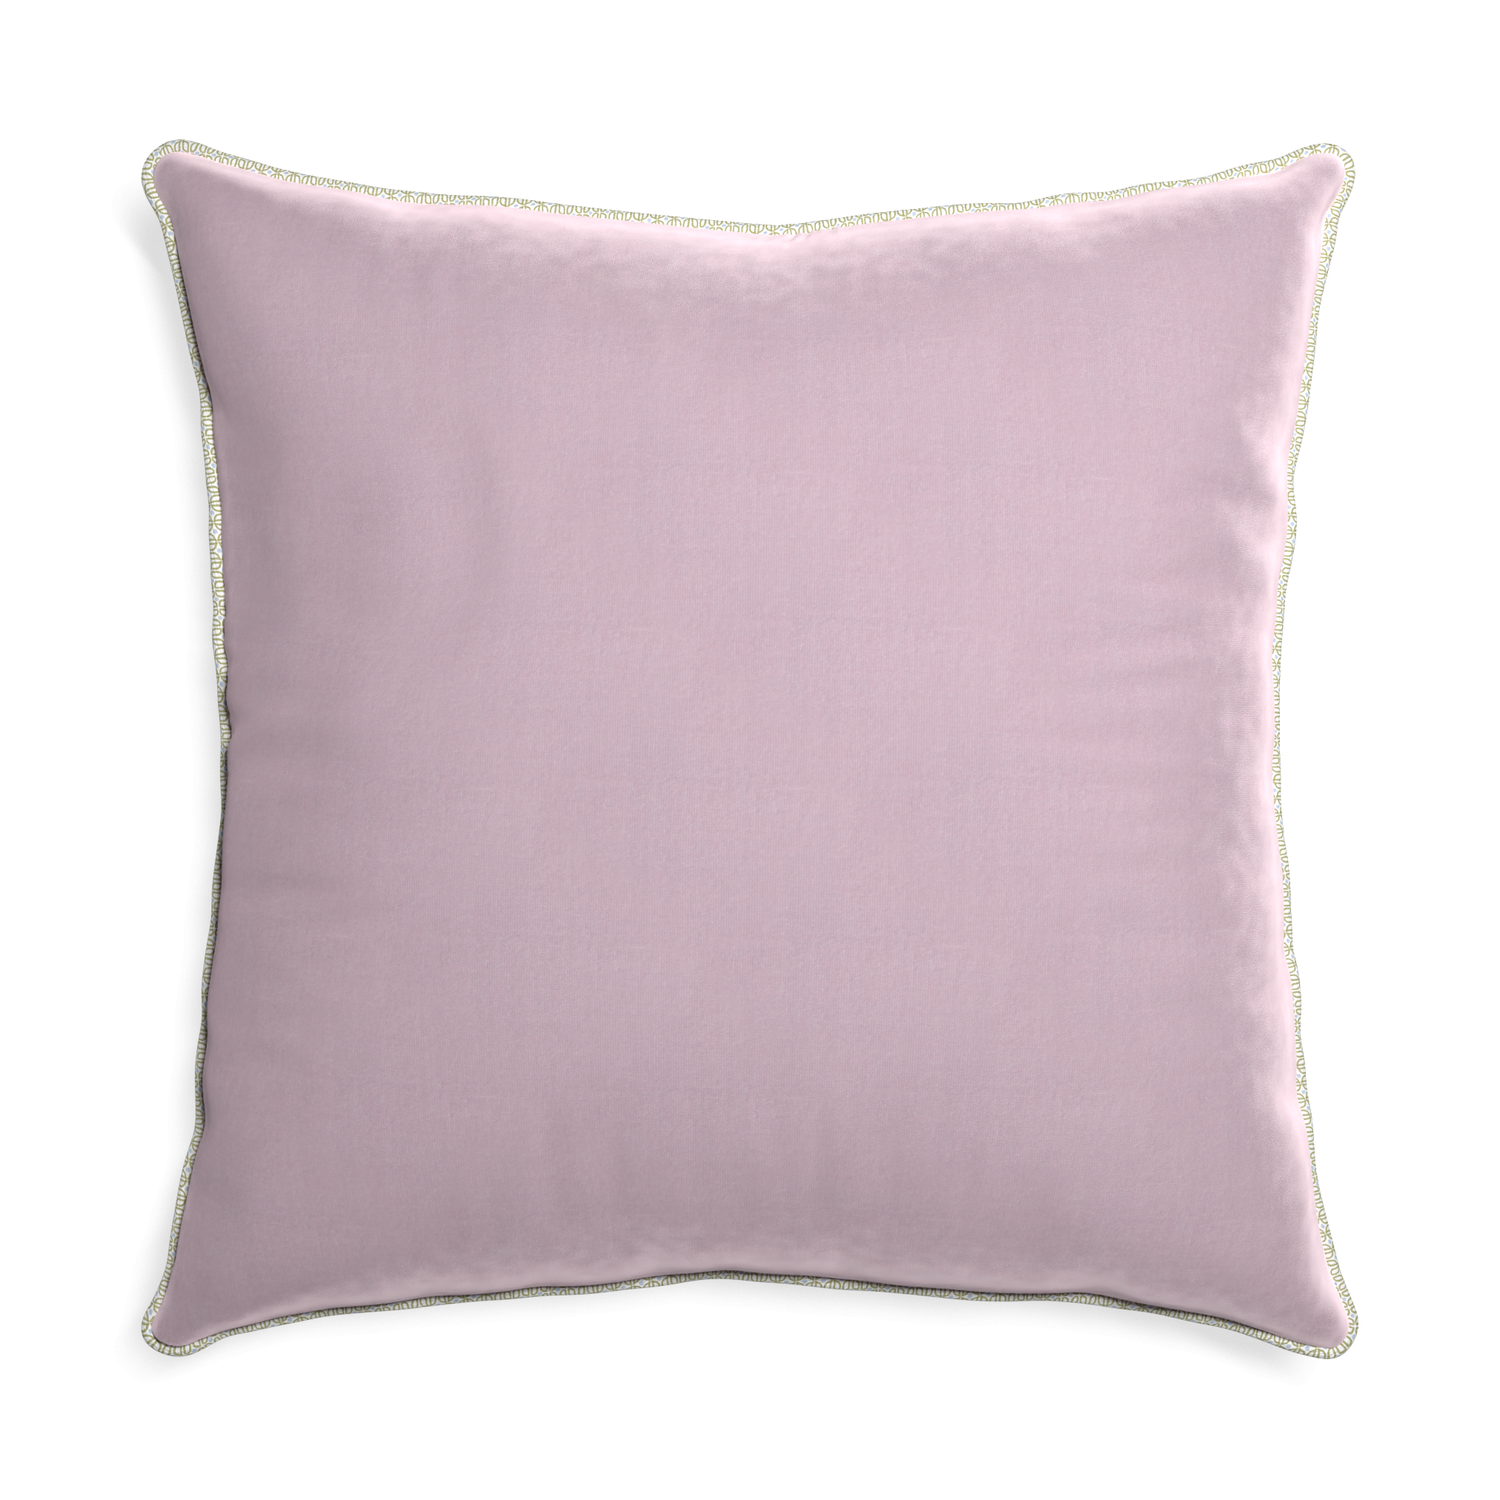 Euro-sham lilac velvet custom pillow with l piping on white background